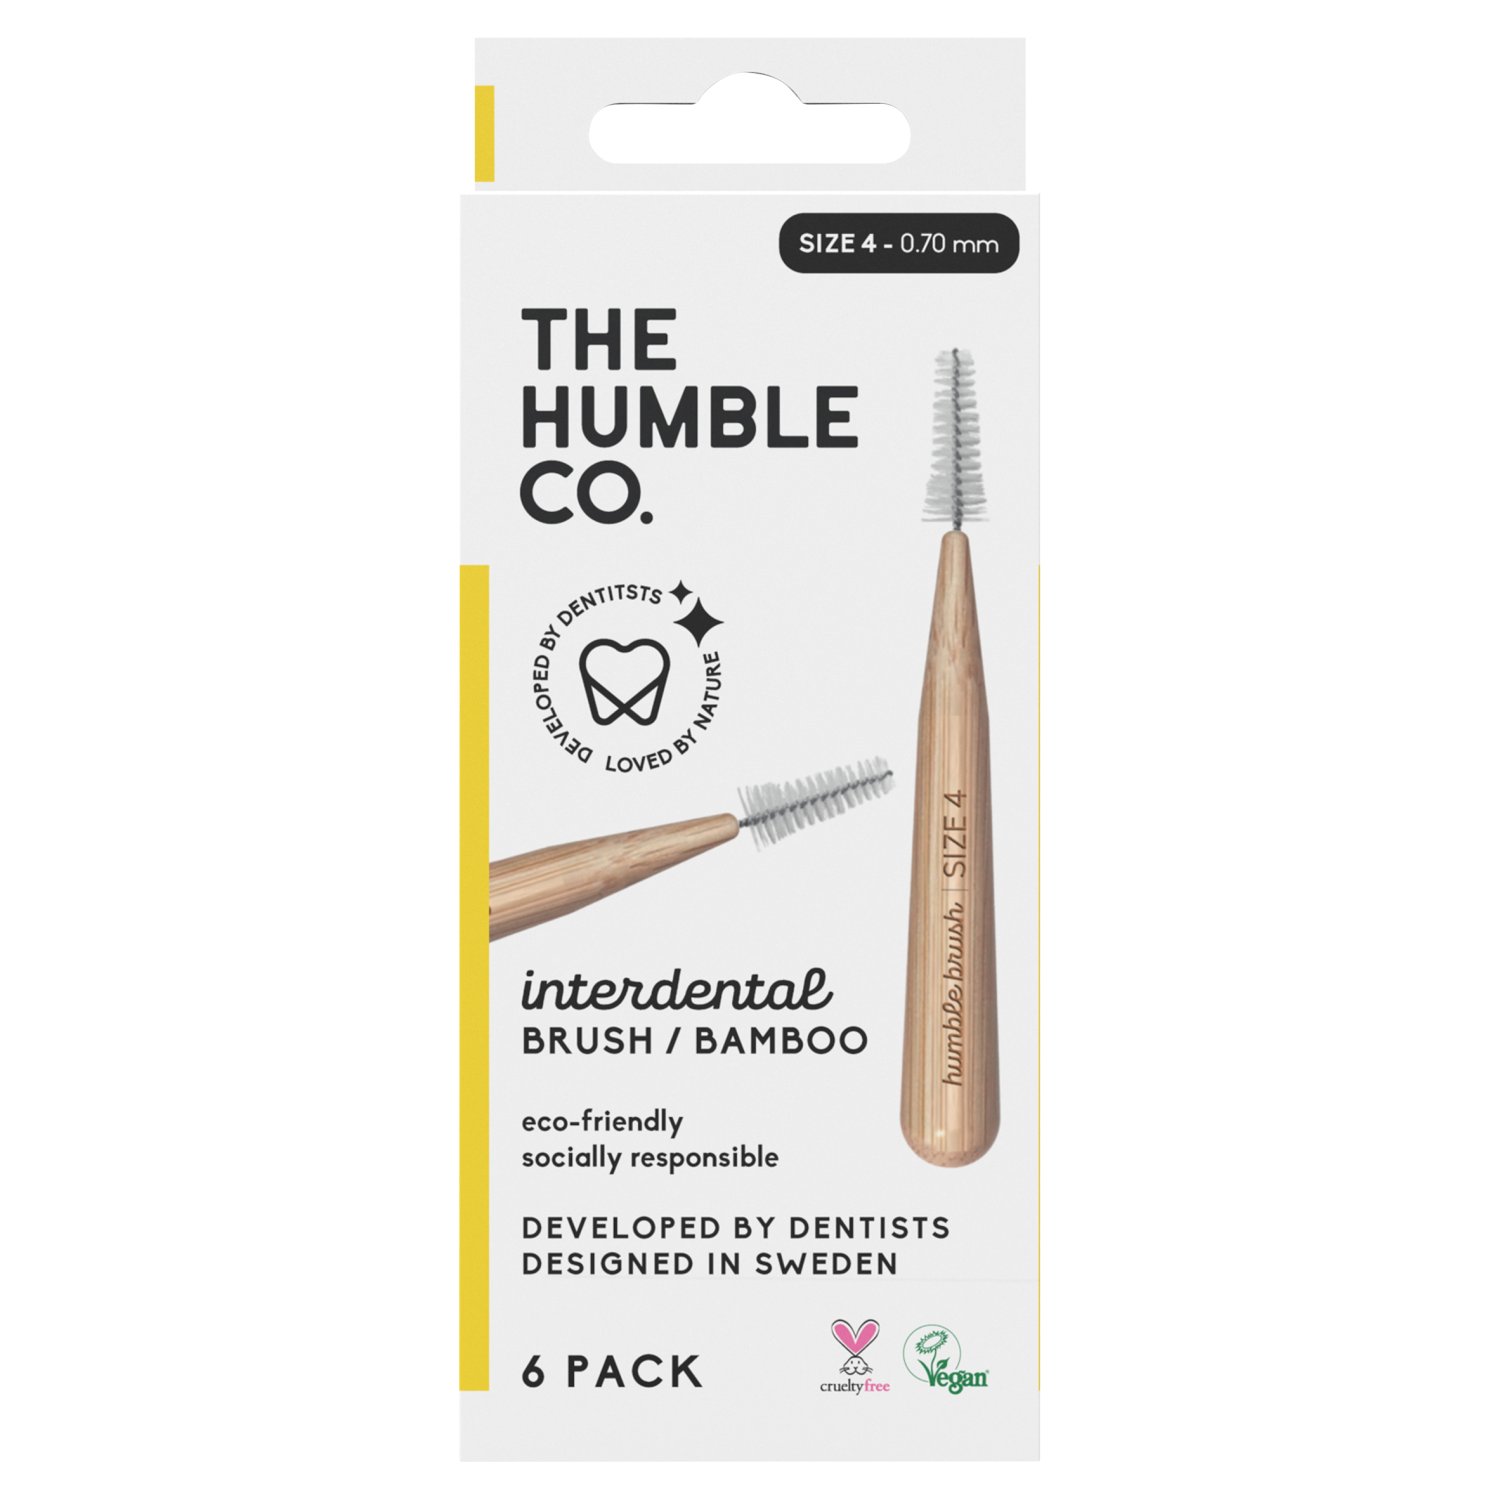 Humble Inderdental Brush 4 - 0.70mm (1 Piece)